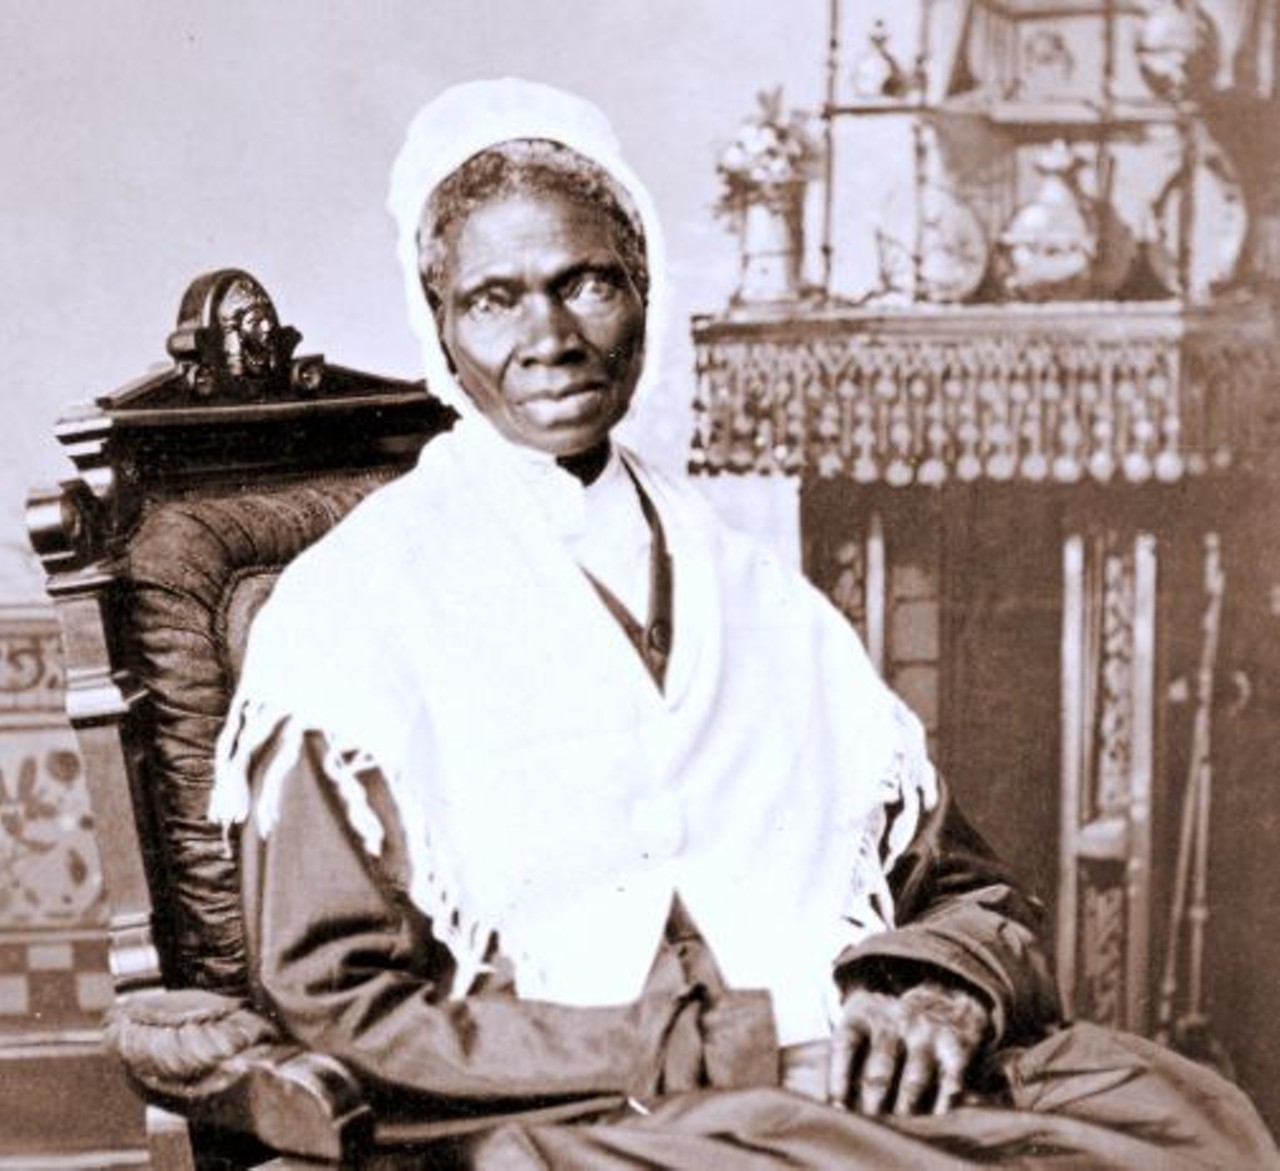 Sojourner Truth
Born into slavery as Isabella Baumfree, Sojourner Truth escaped to freedom and became a prominent abolitionist and women's rights activist. She spent a significant portion of her life in Michigan, where she worked tirelessly for the abolition of slavery and equal rights for all.